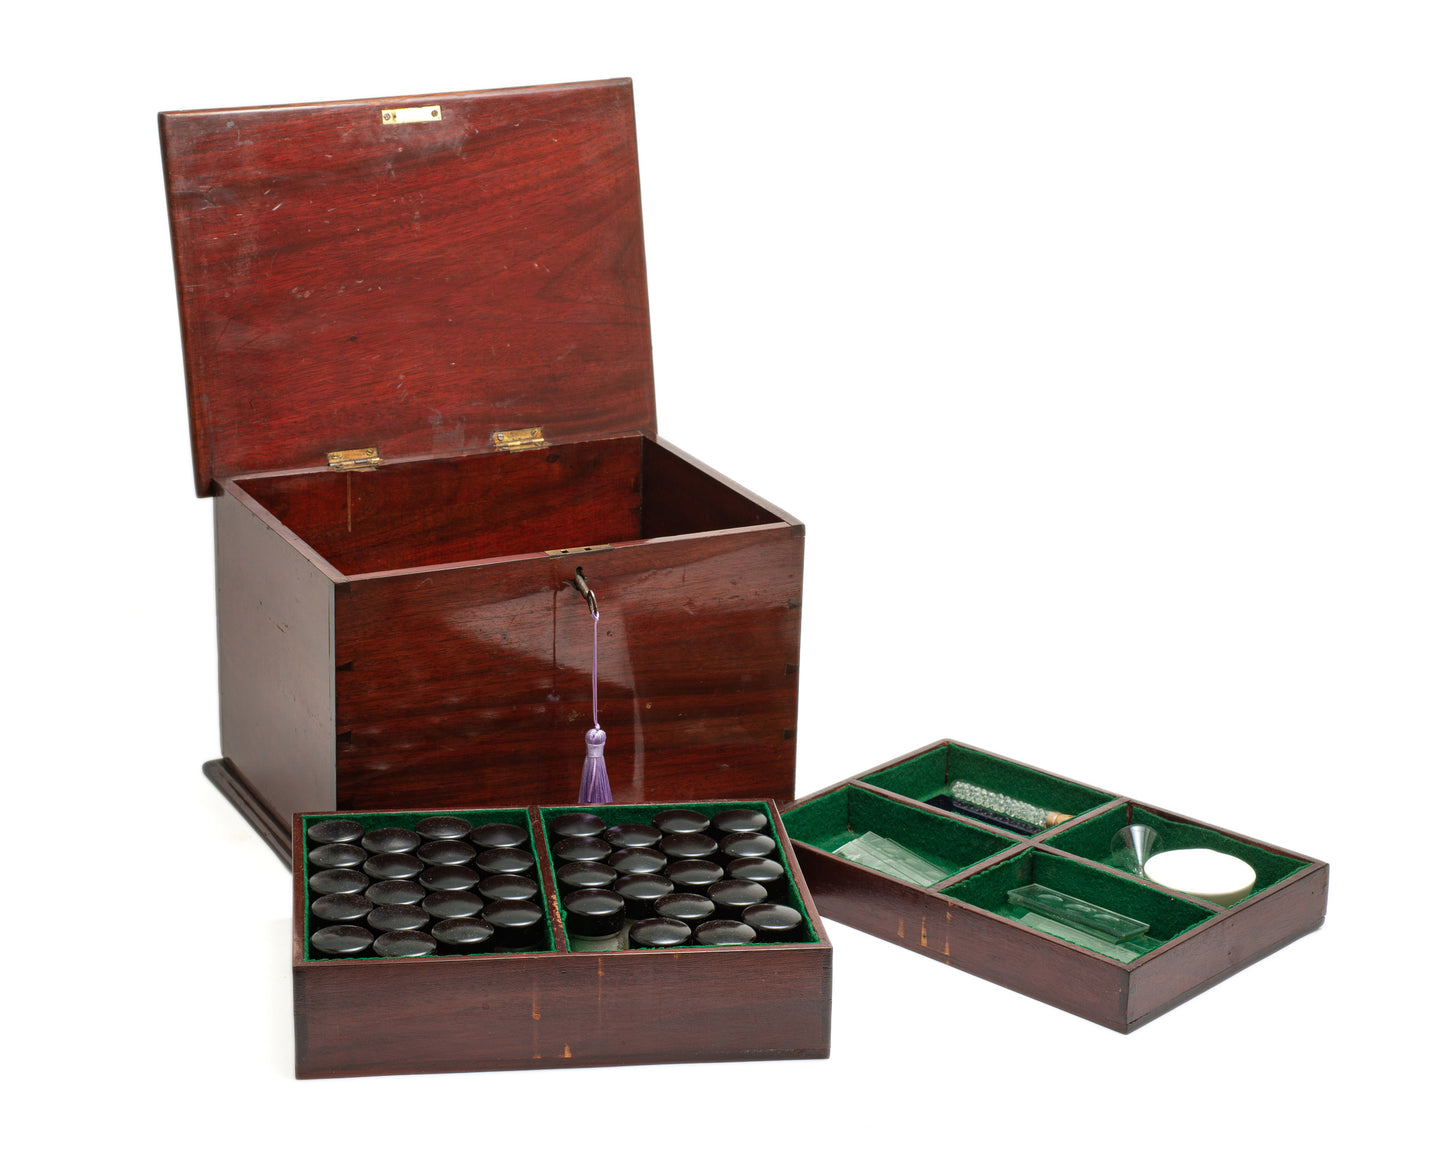 Antique Chemists Scientific Box with Contents, Mahogany Wood Victorian/Edwardian (Code 2218)